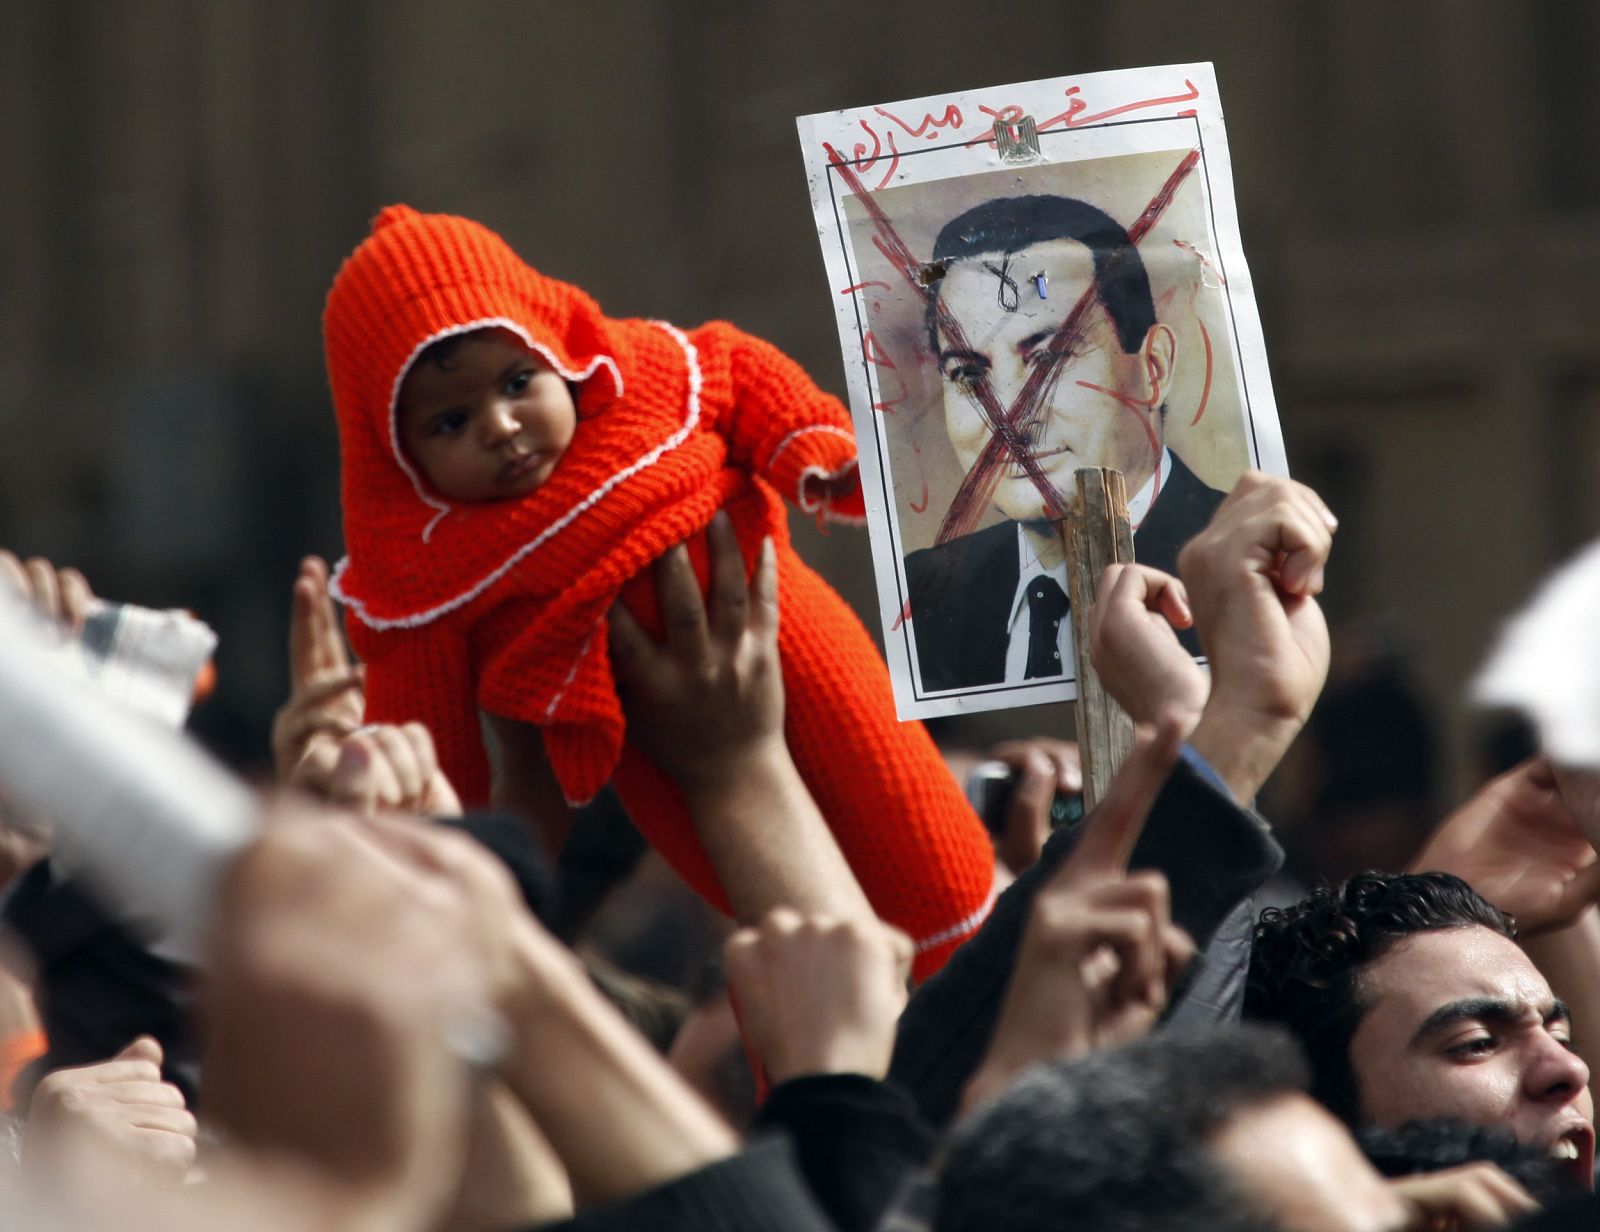 A protester holds up a child in front of a picture of Egypt's President Hosni Mubarak during a protest in Cairo